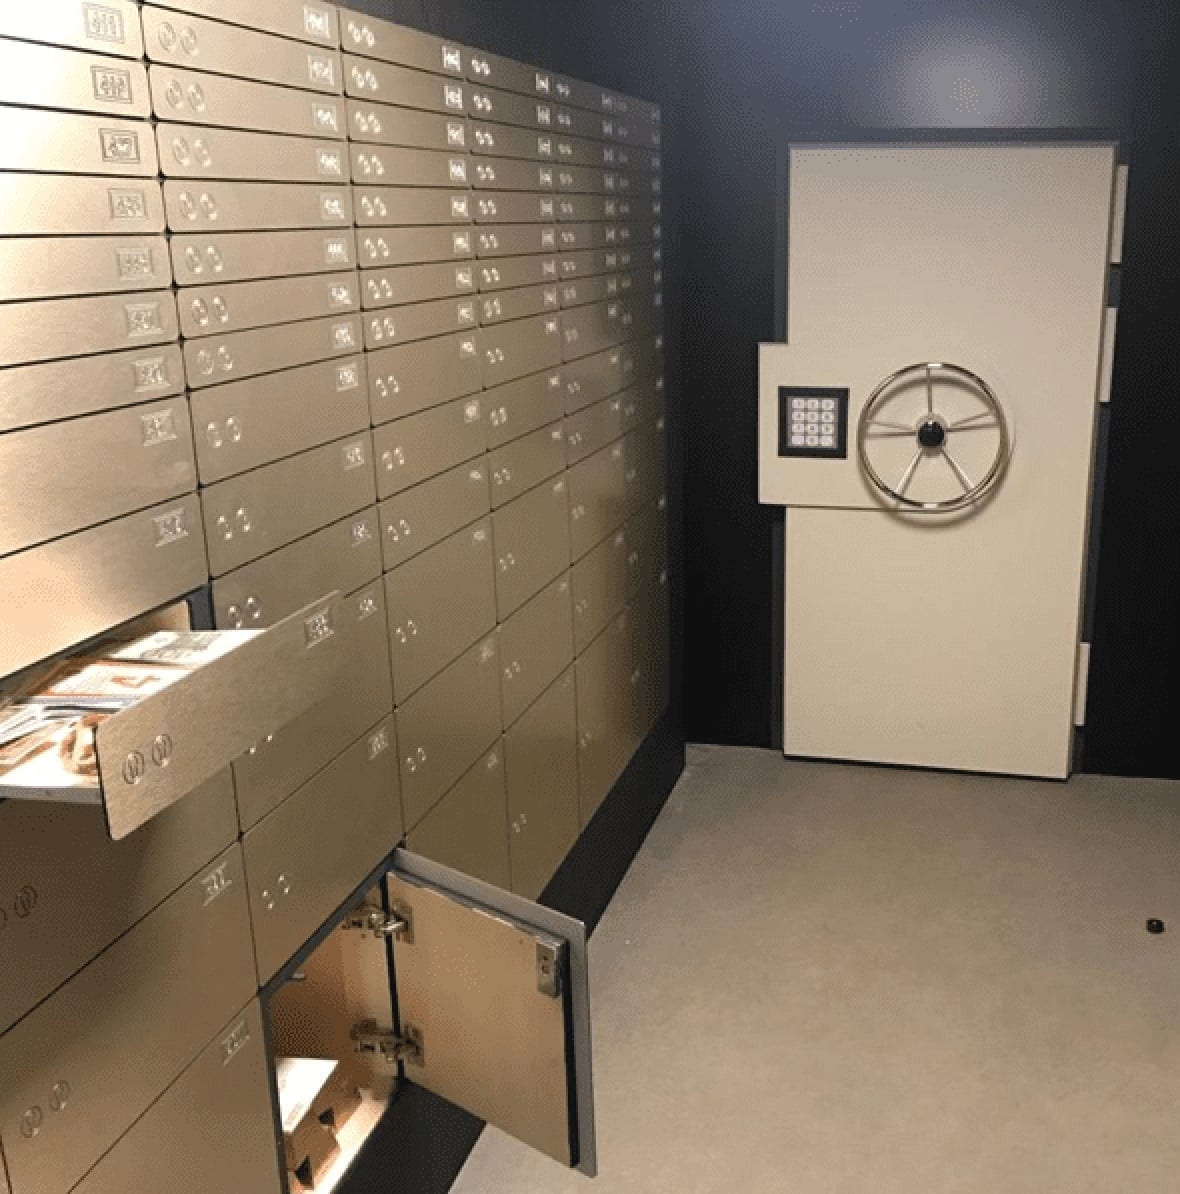 Escape room – Room with several safe drawers